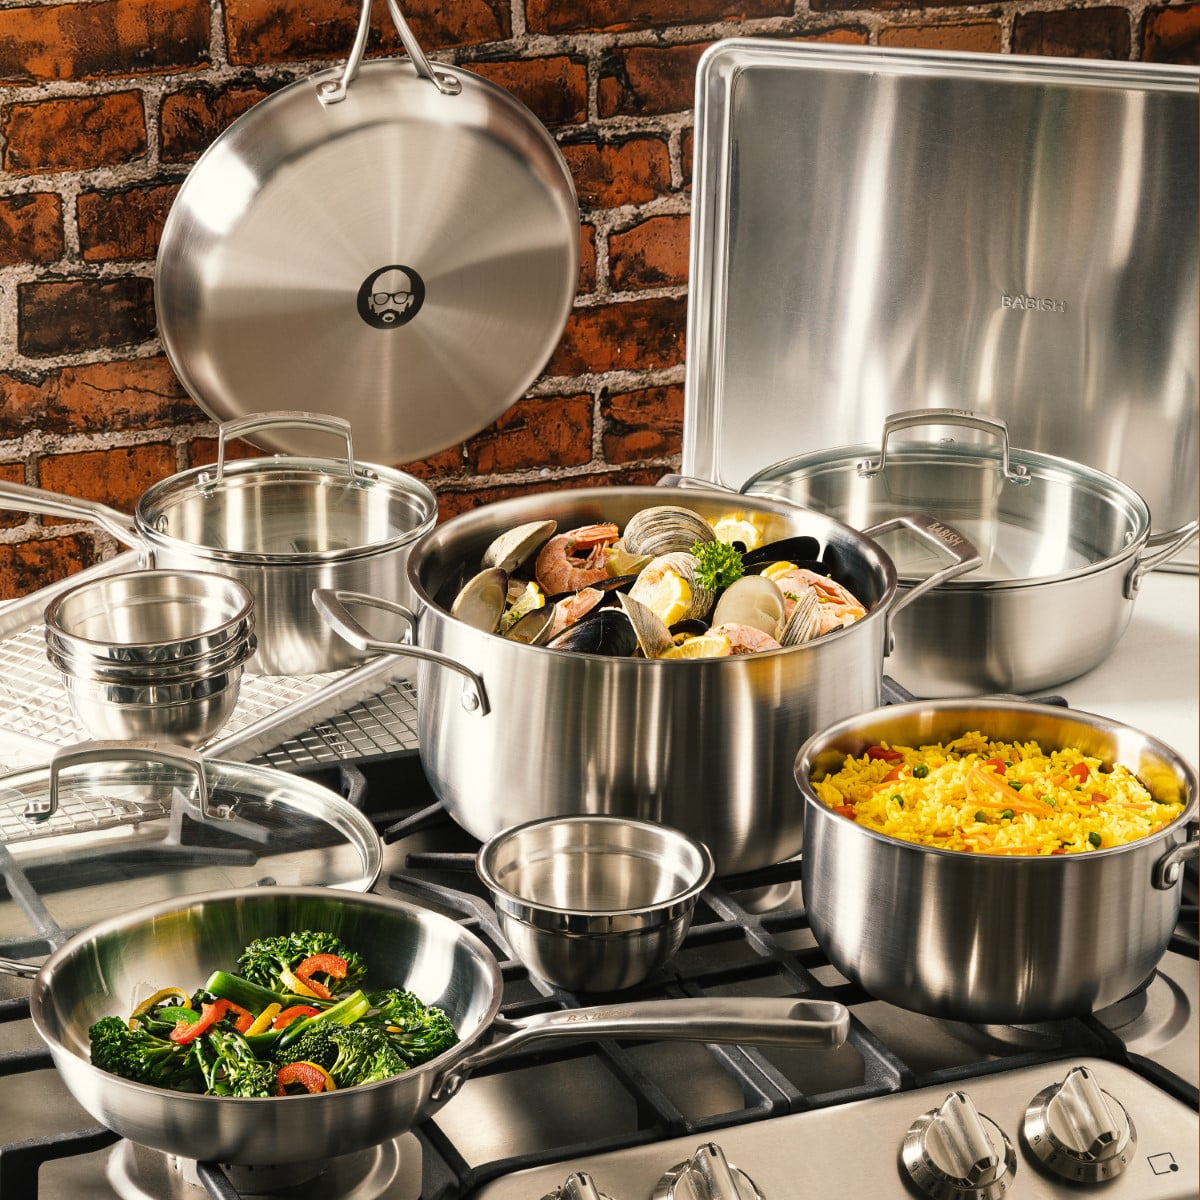  Babish 12-Piece Mixed Material (Stainless Steel, Carbon Steel,  & Aluminum) Professional Grade Cookware Set W/Baking Sheets: Home & Kitchen